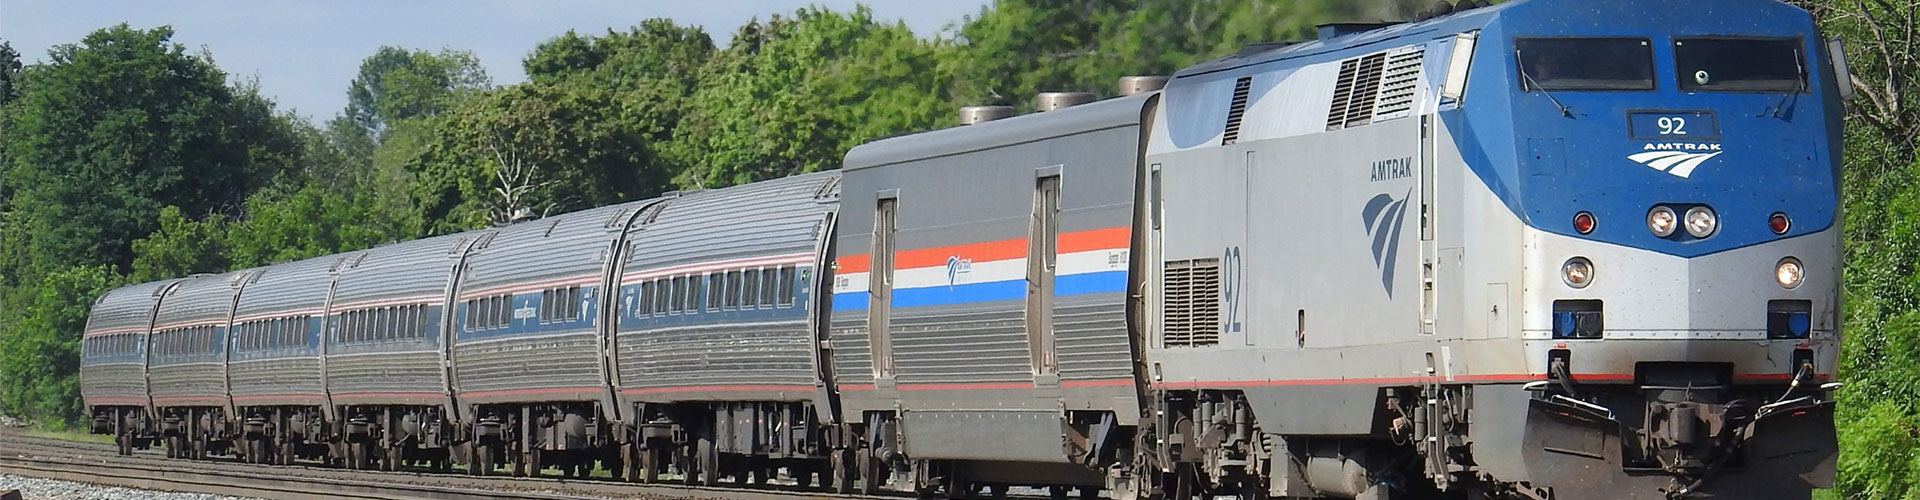 An Amtrak passenger train on the rails, with green trees in the background.